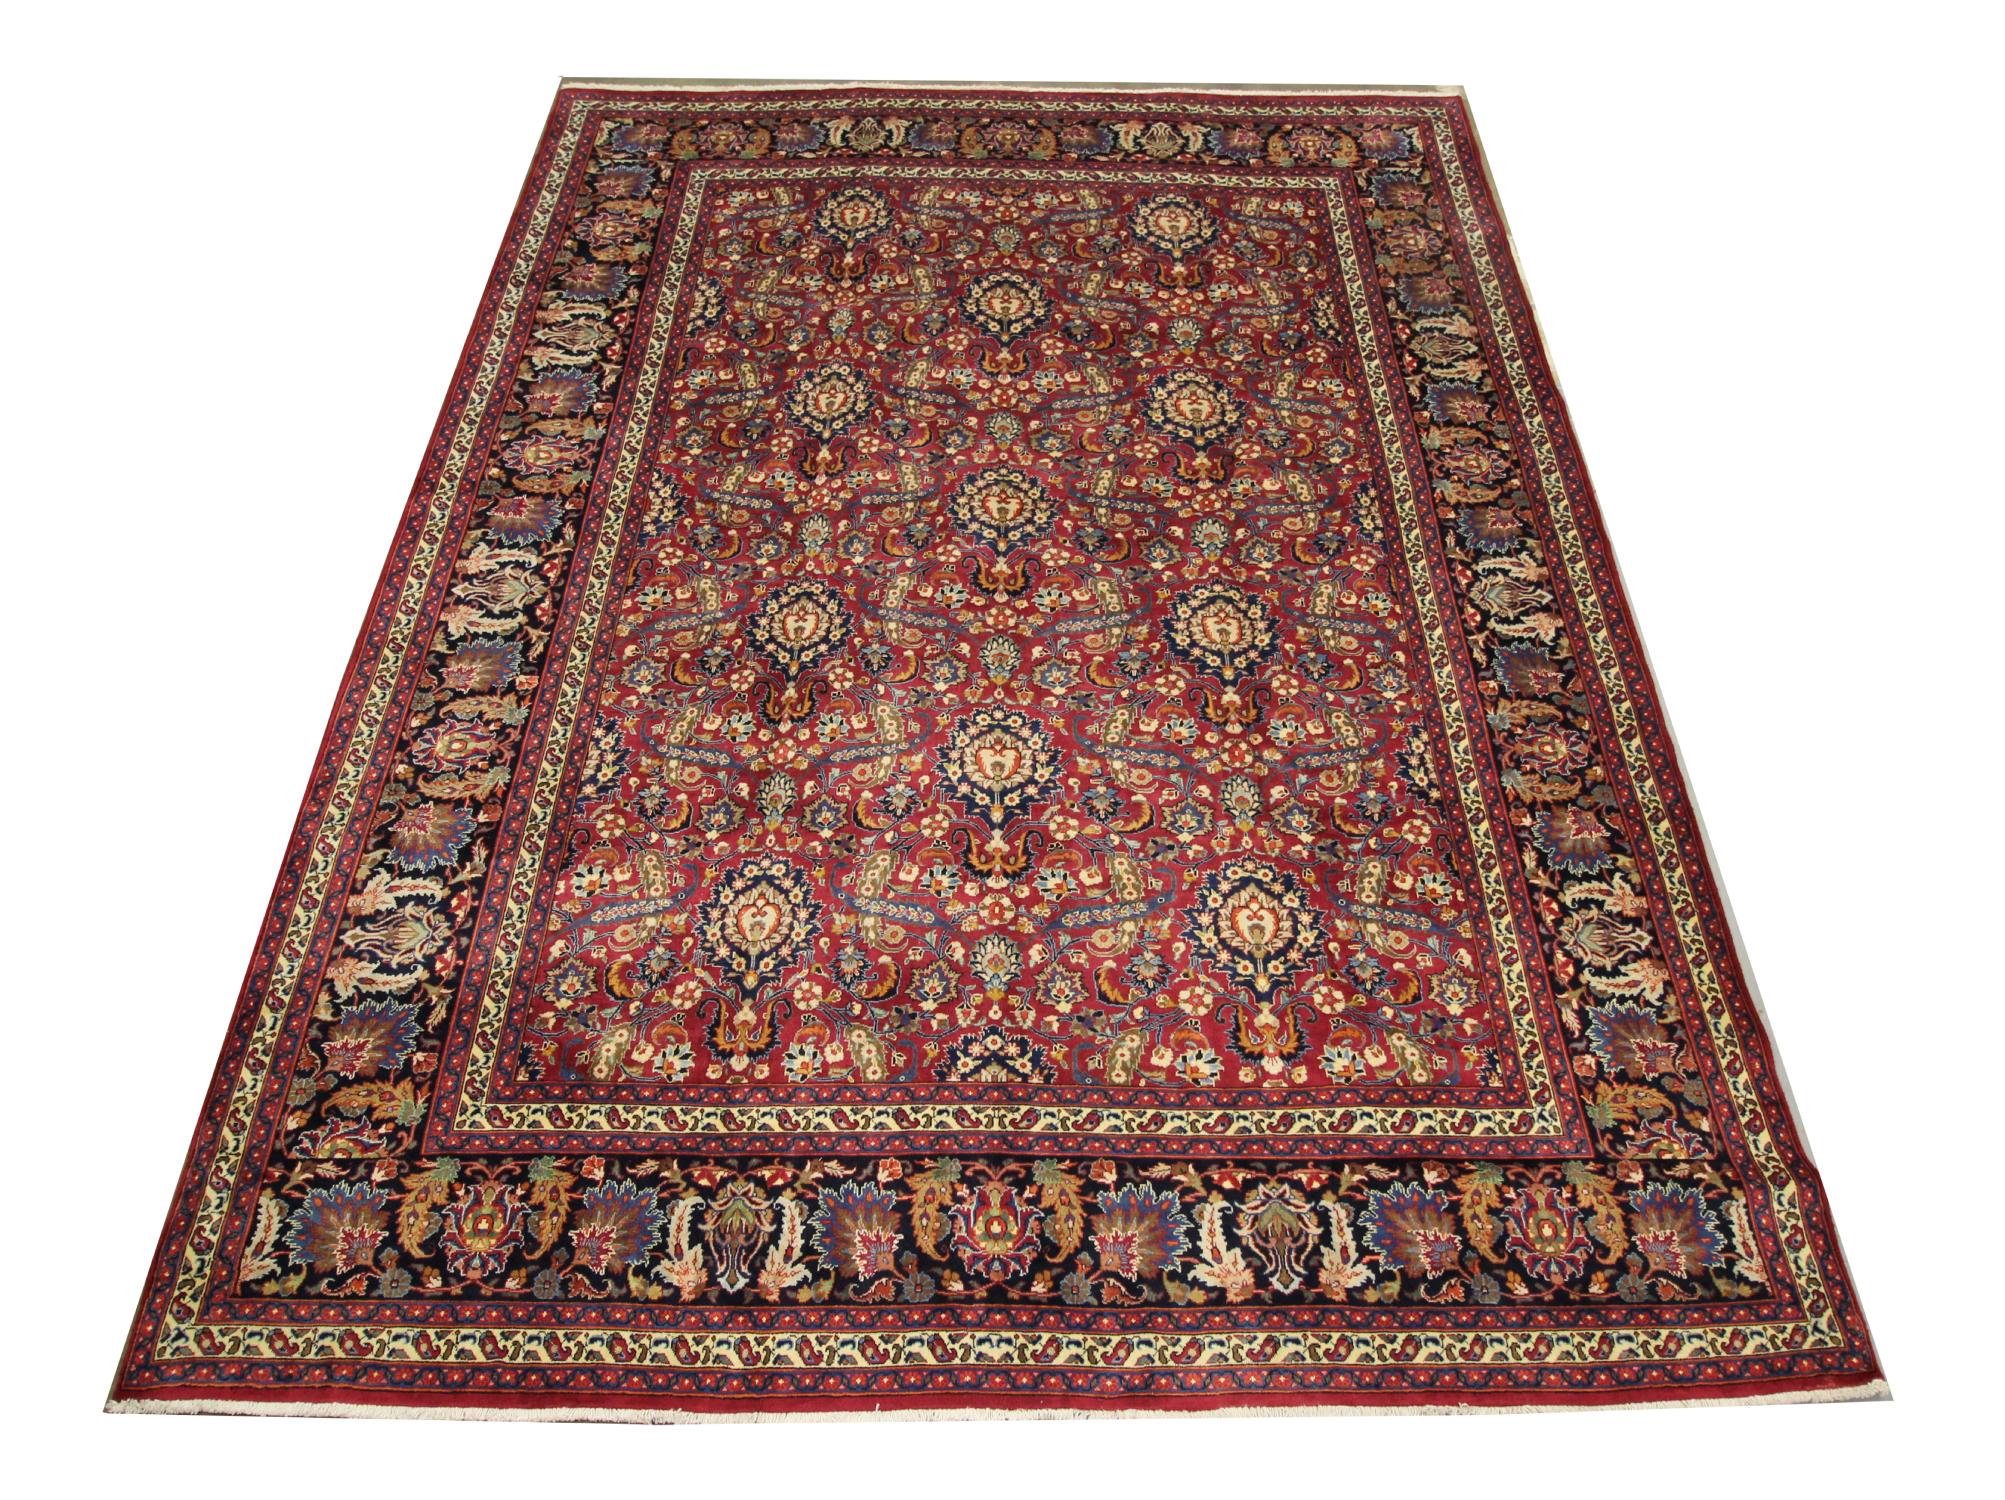 Faithful to the style of many stunning Turkish large rugs, this antique Oriental rug masterpiece features an antique rugs design. The floral carpet combines vibrant colours with elegantly flowing floral motifs to create a sophisticated surface that